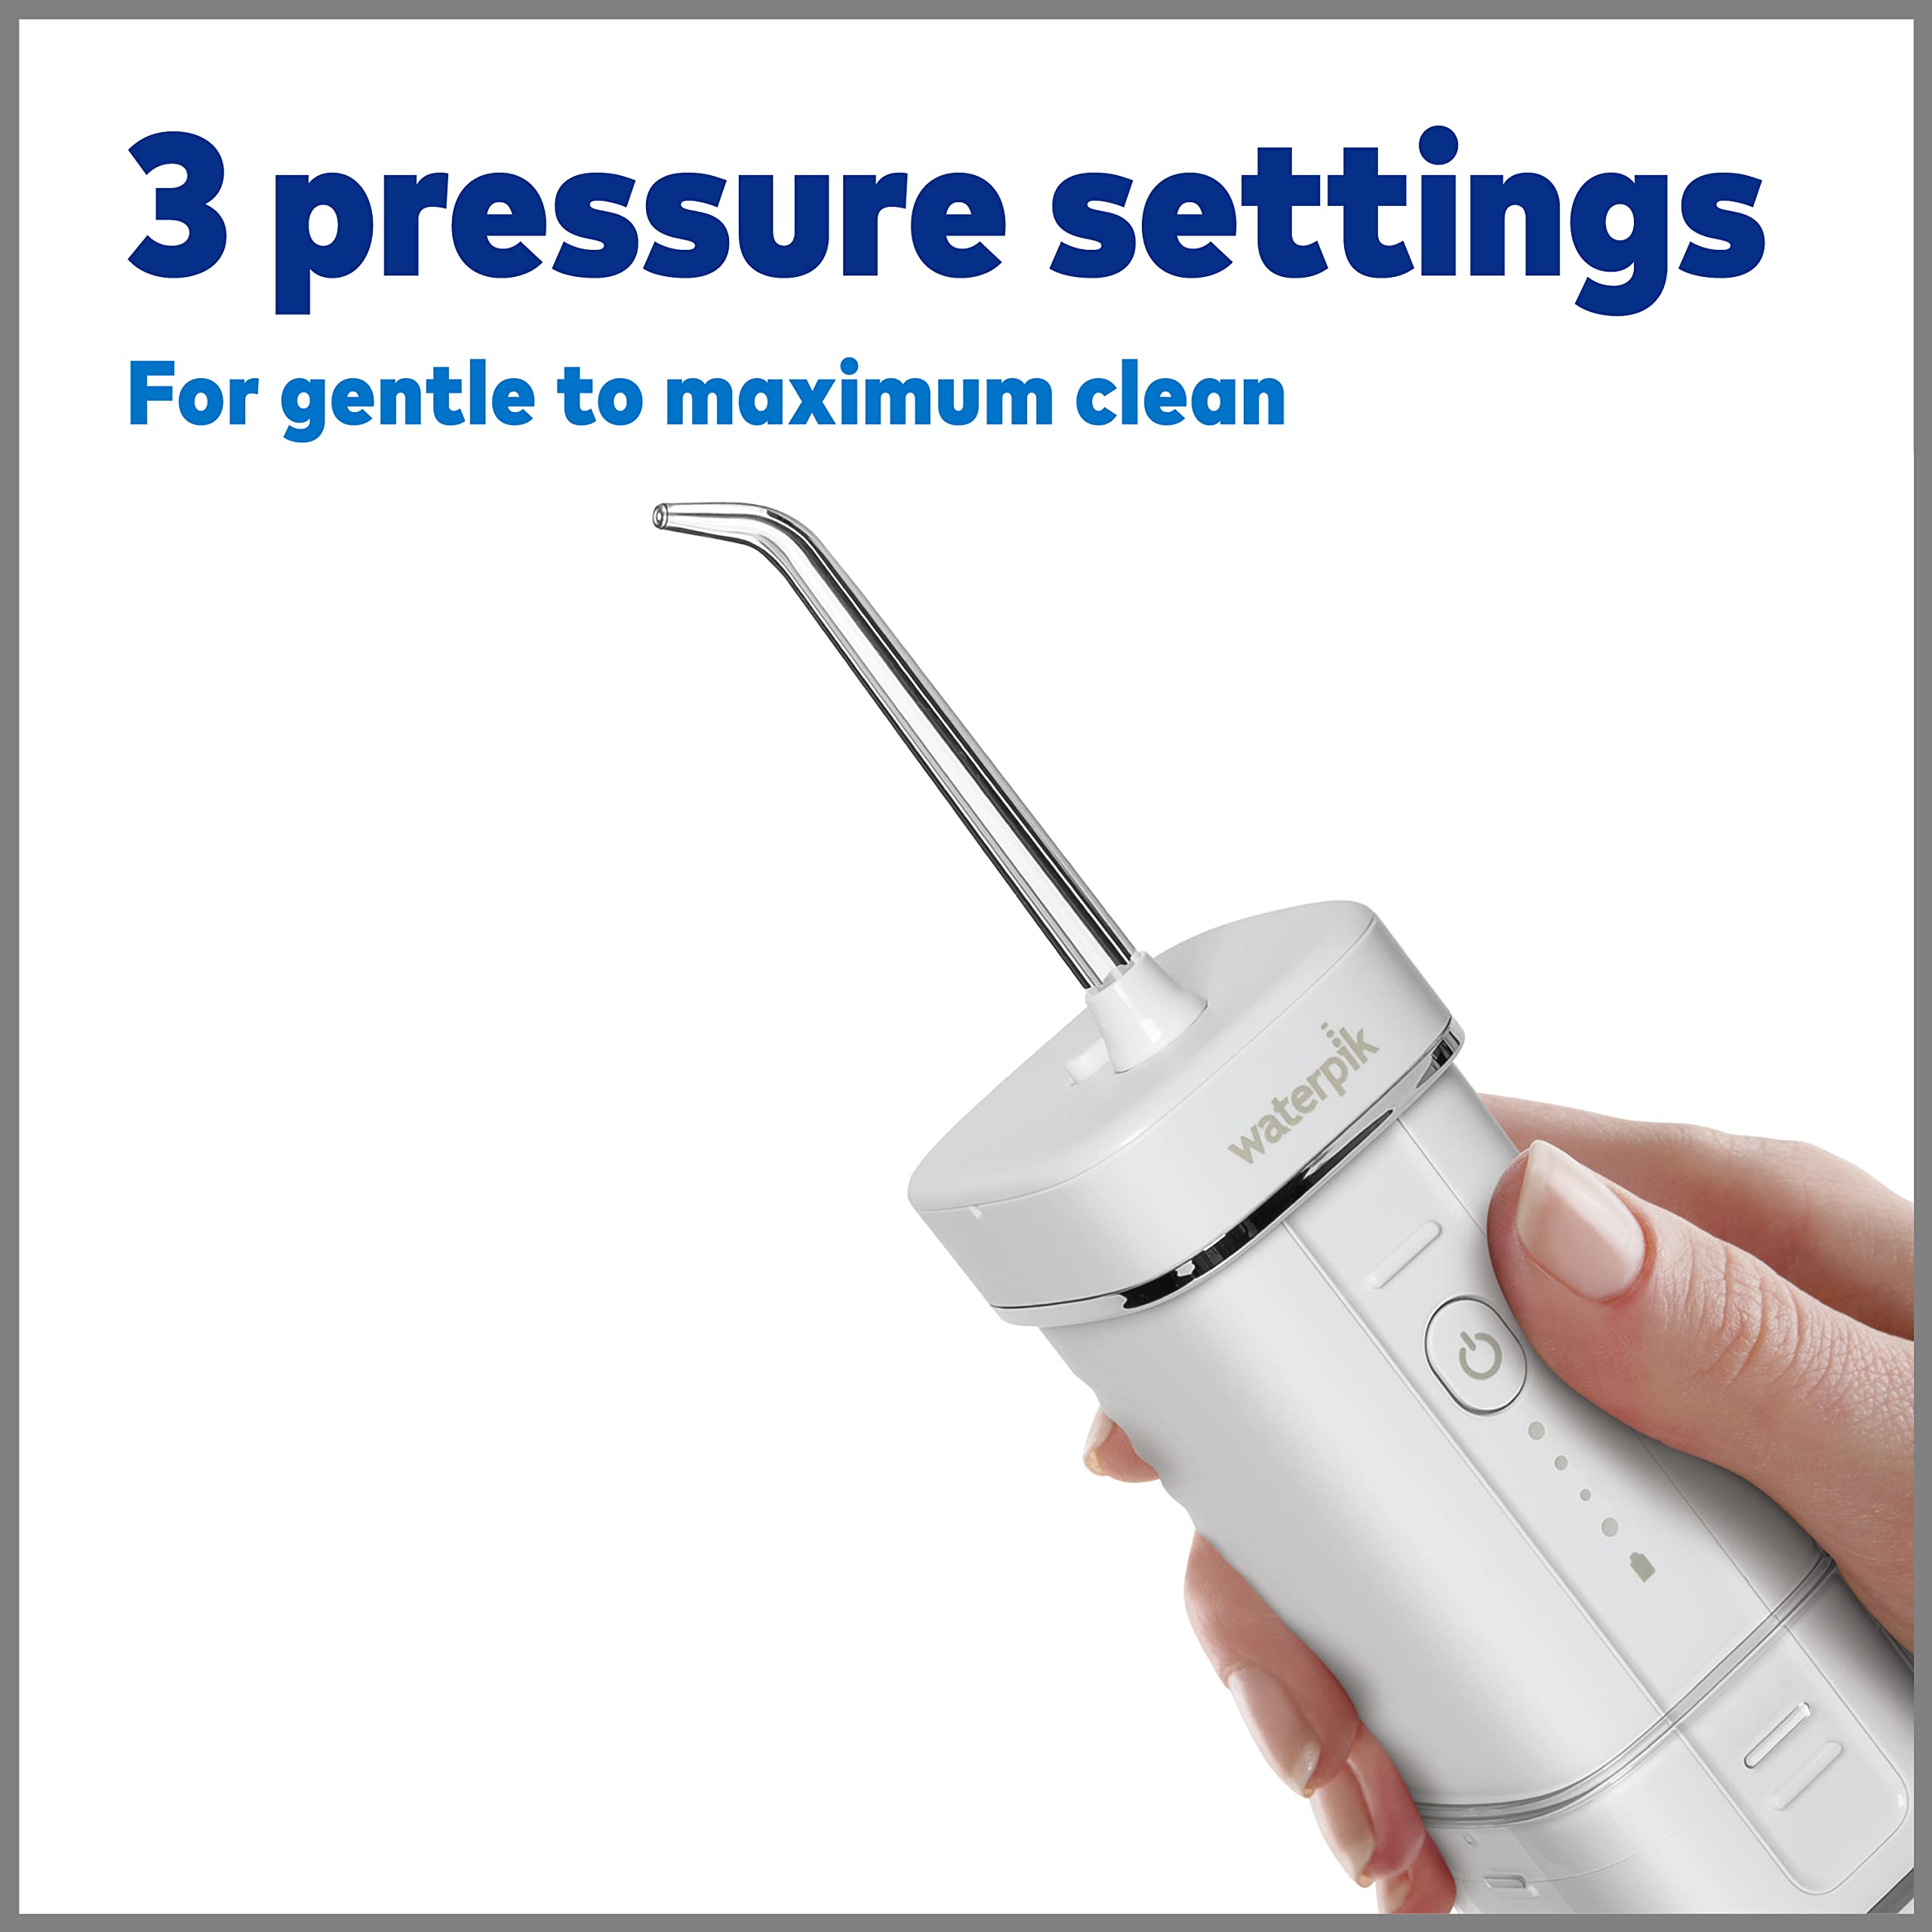 Waterpik Cordless Slide Professional Water Flosser, Portable Collapsible for Travel and Storage, with Travel Bag and 4 Tips, ADA Accepted, Rechargeable and Waterproof, White WF-17CD010-1